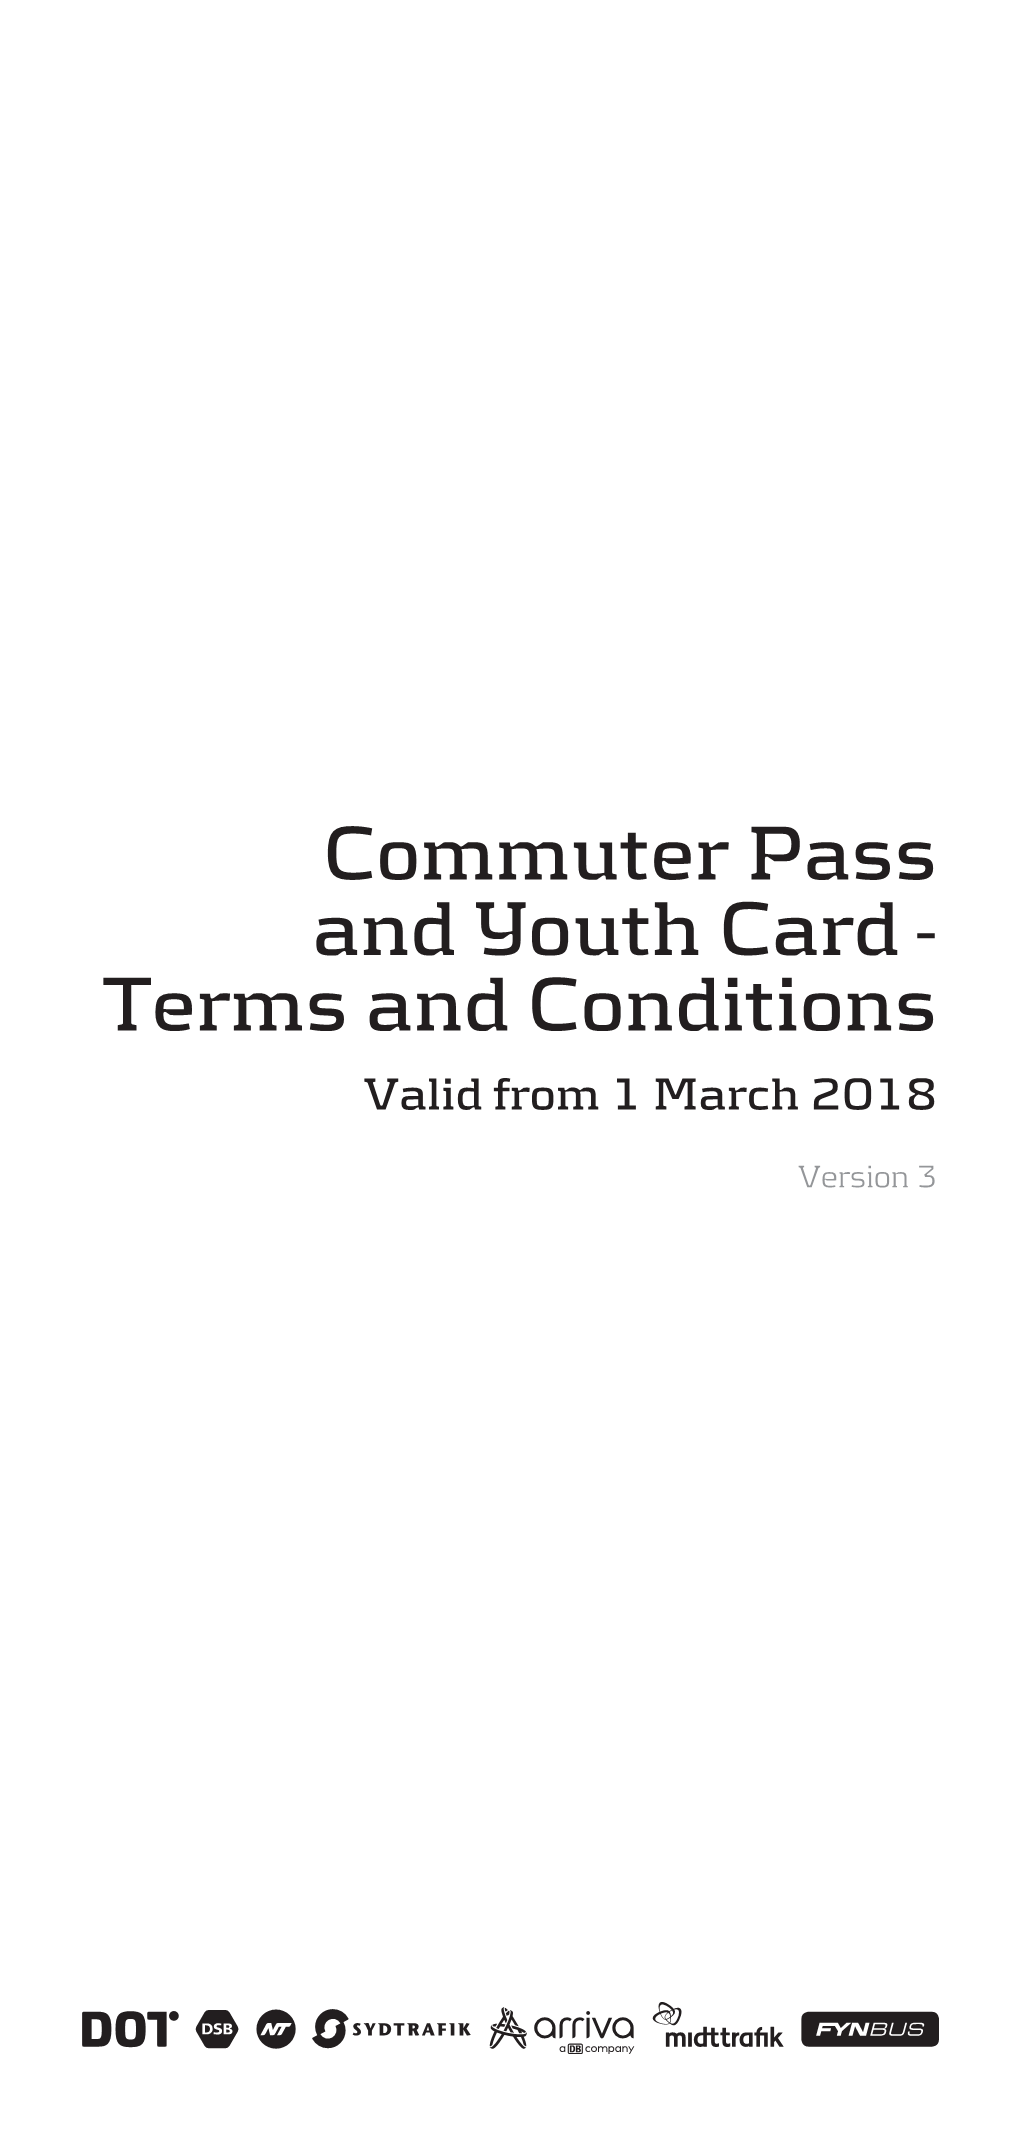 Commuter Pass and Youth Card - Terms and Conditions Valid from 1 March 2018